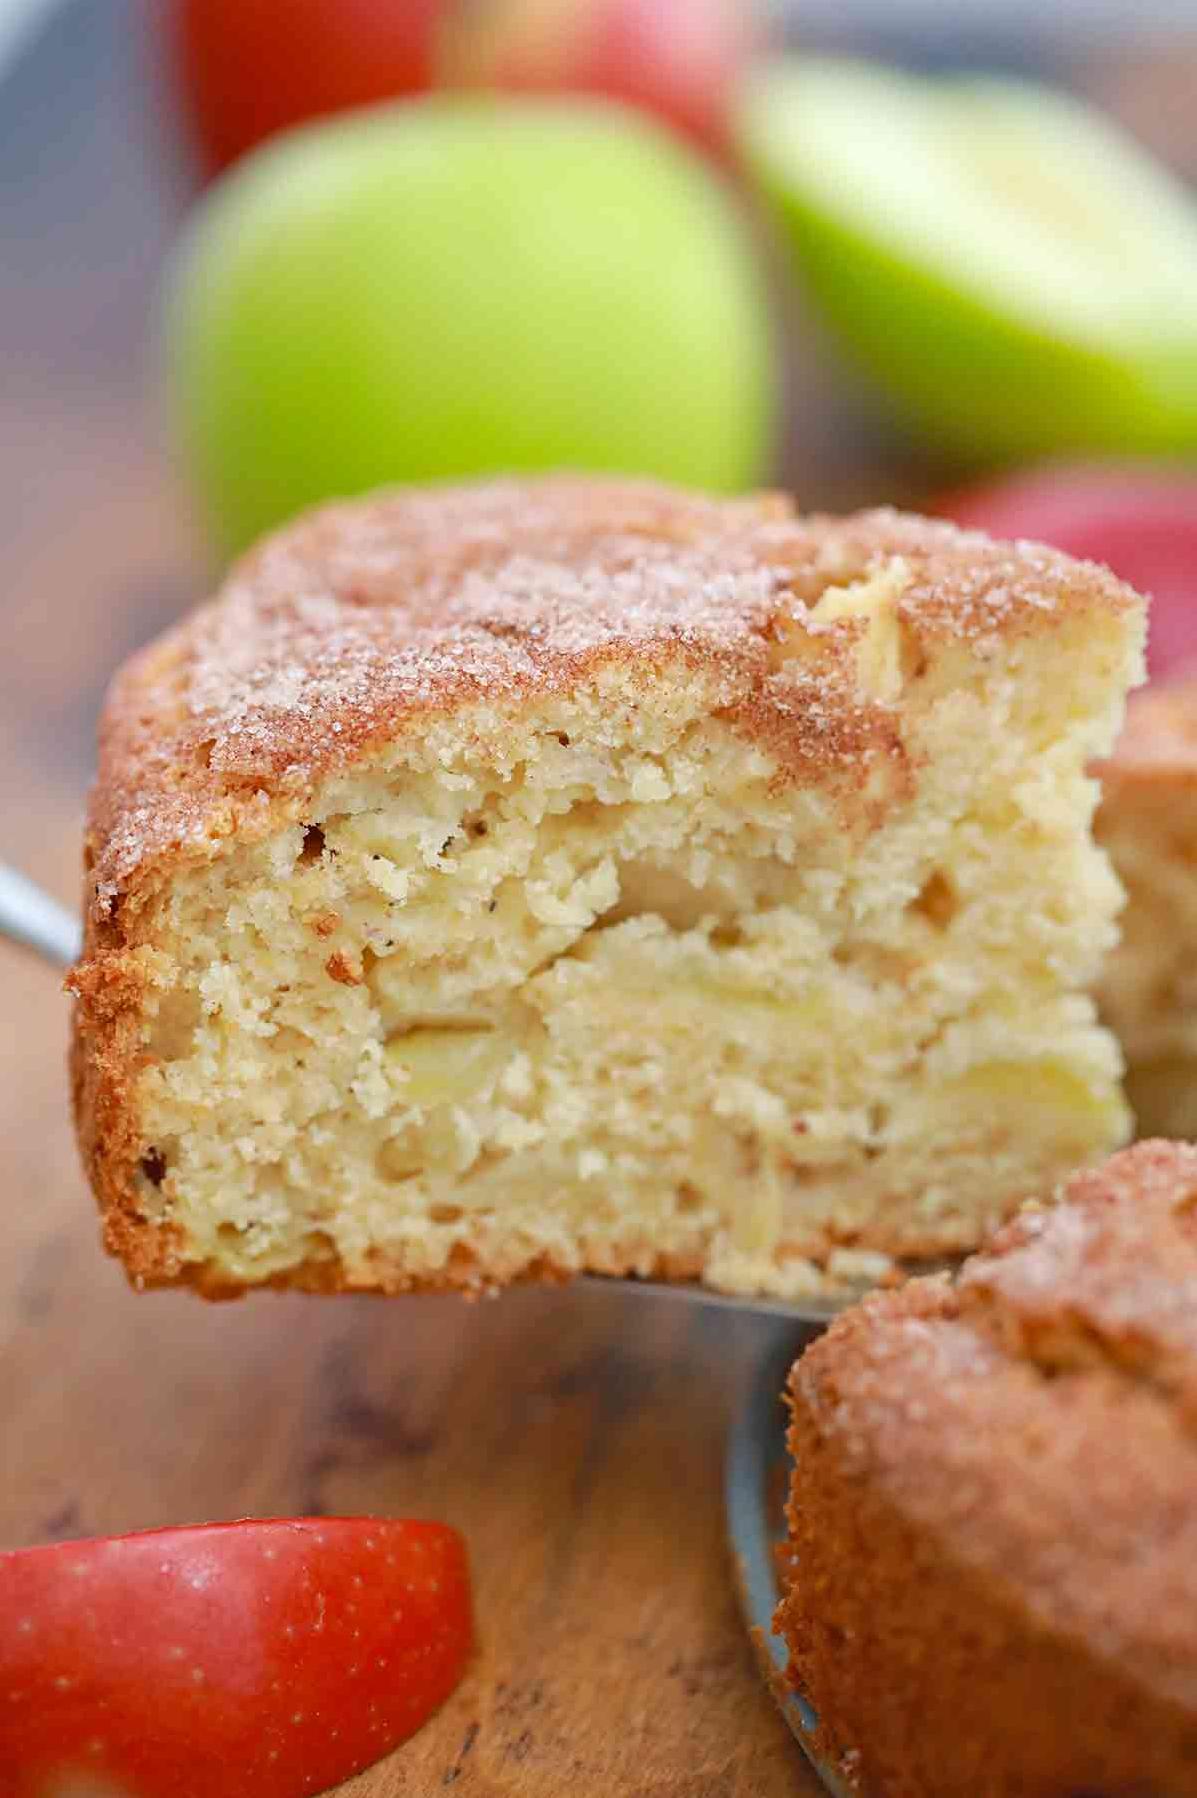  We've taken an old-fashioned recipe and given it a modern twist with extra spices and a generous helping of apples.